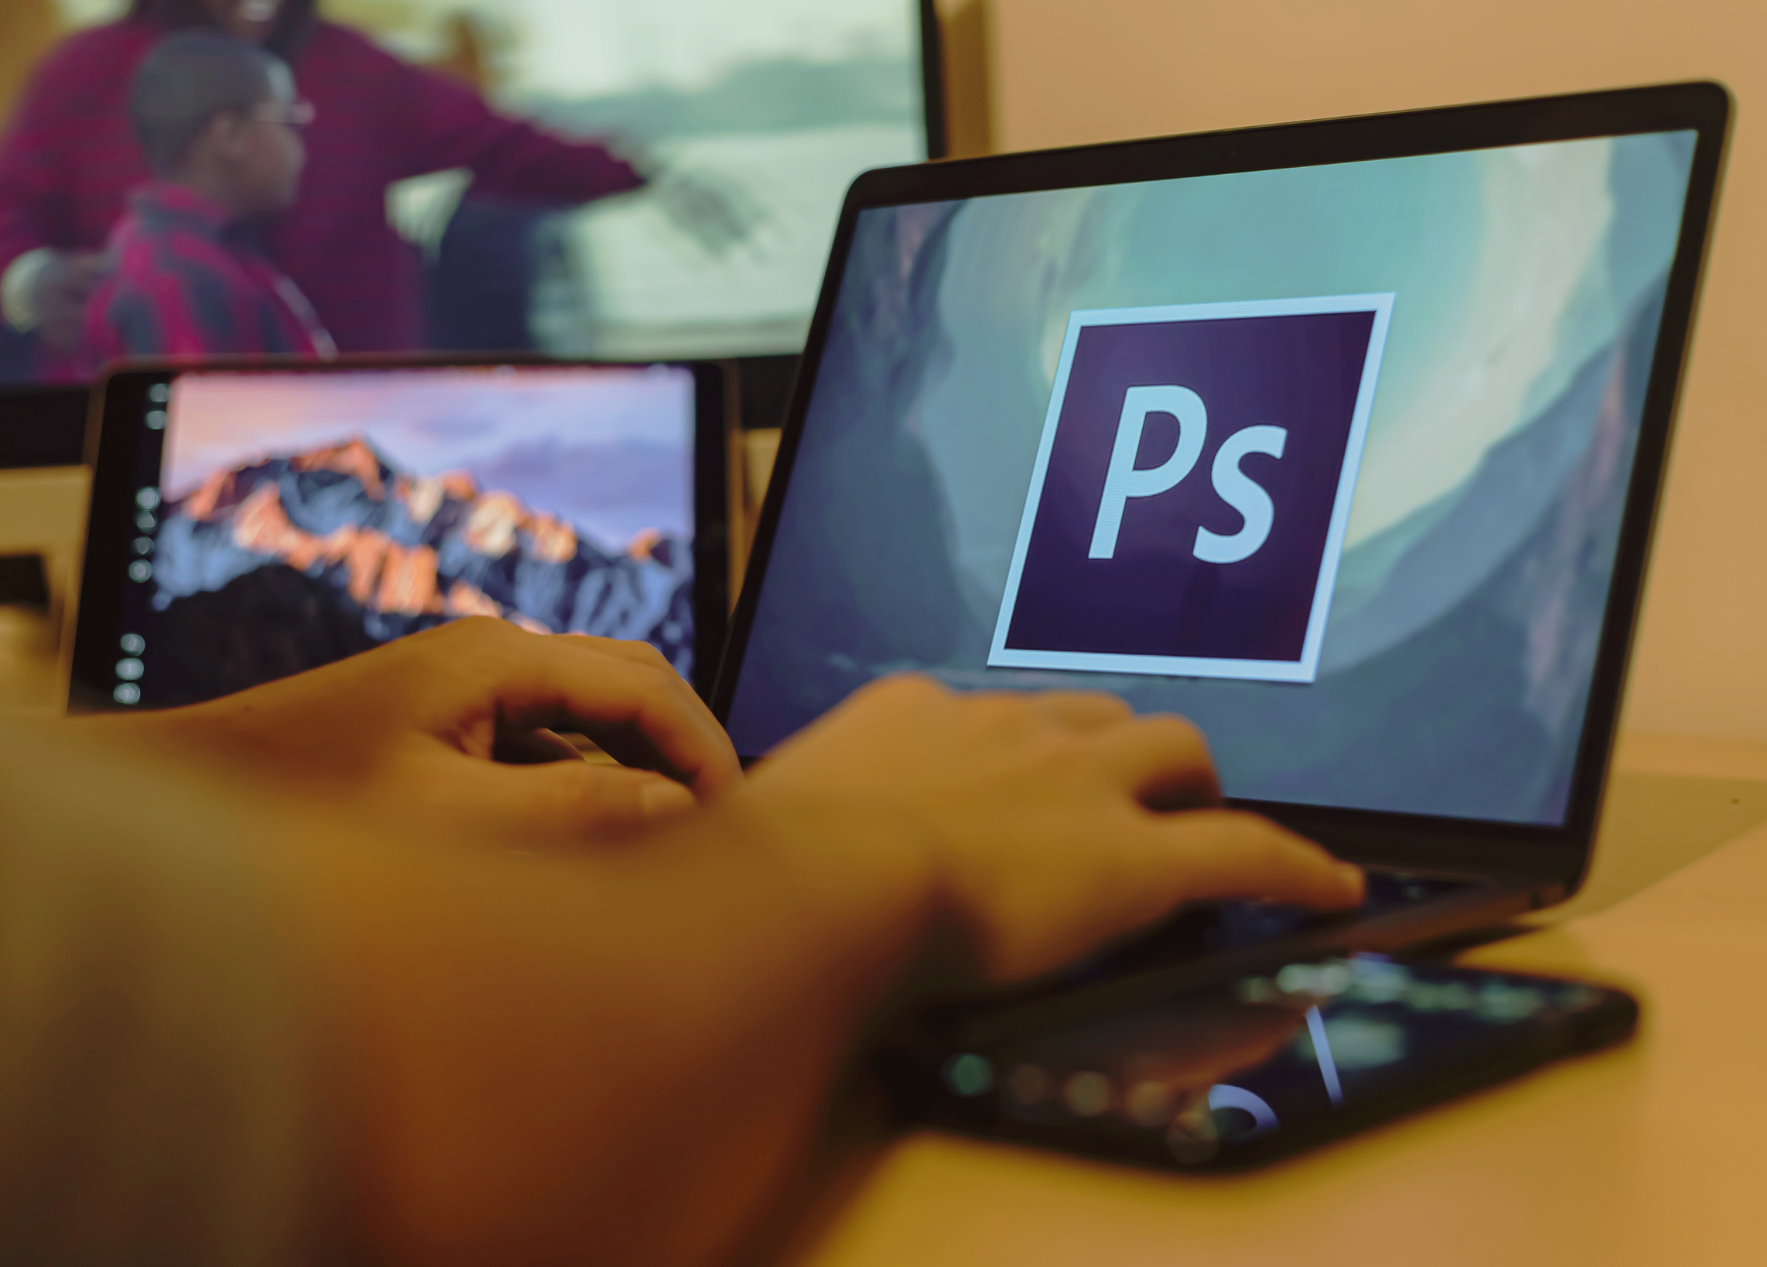 Adobe photoshop for making great designs